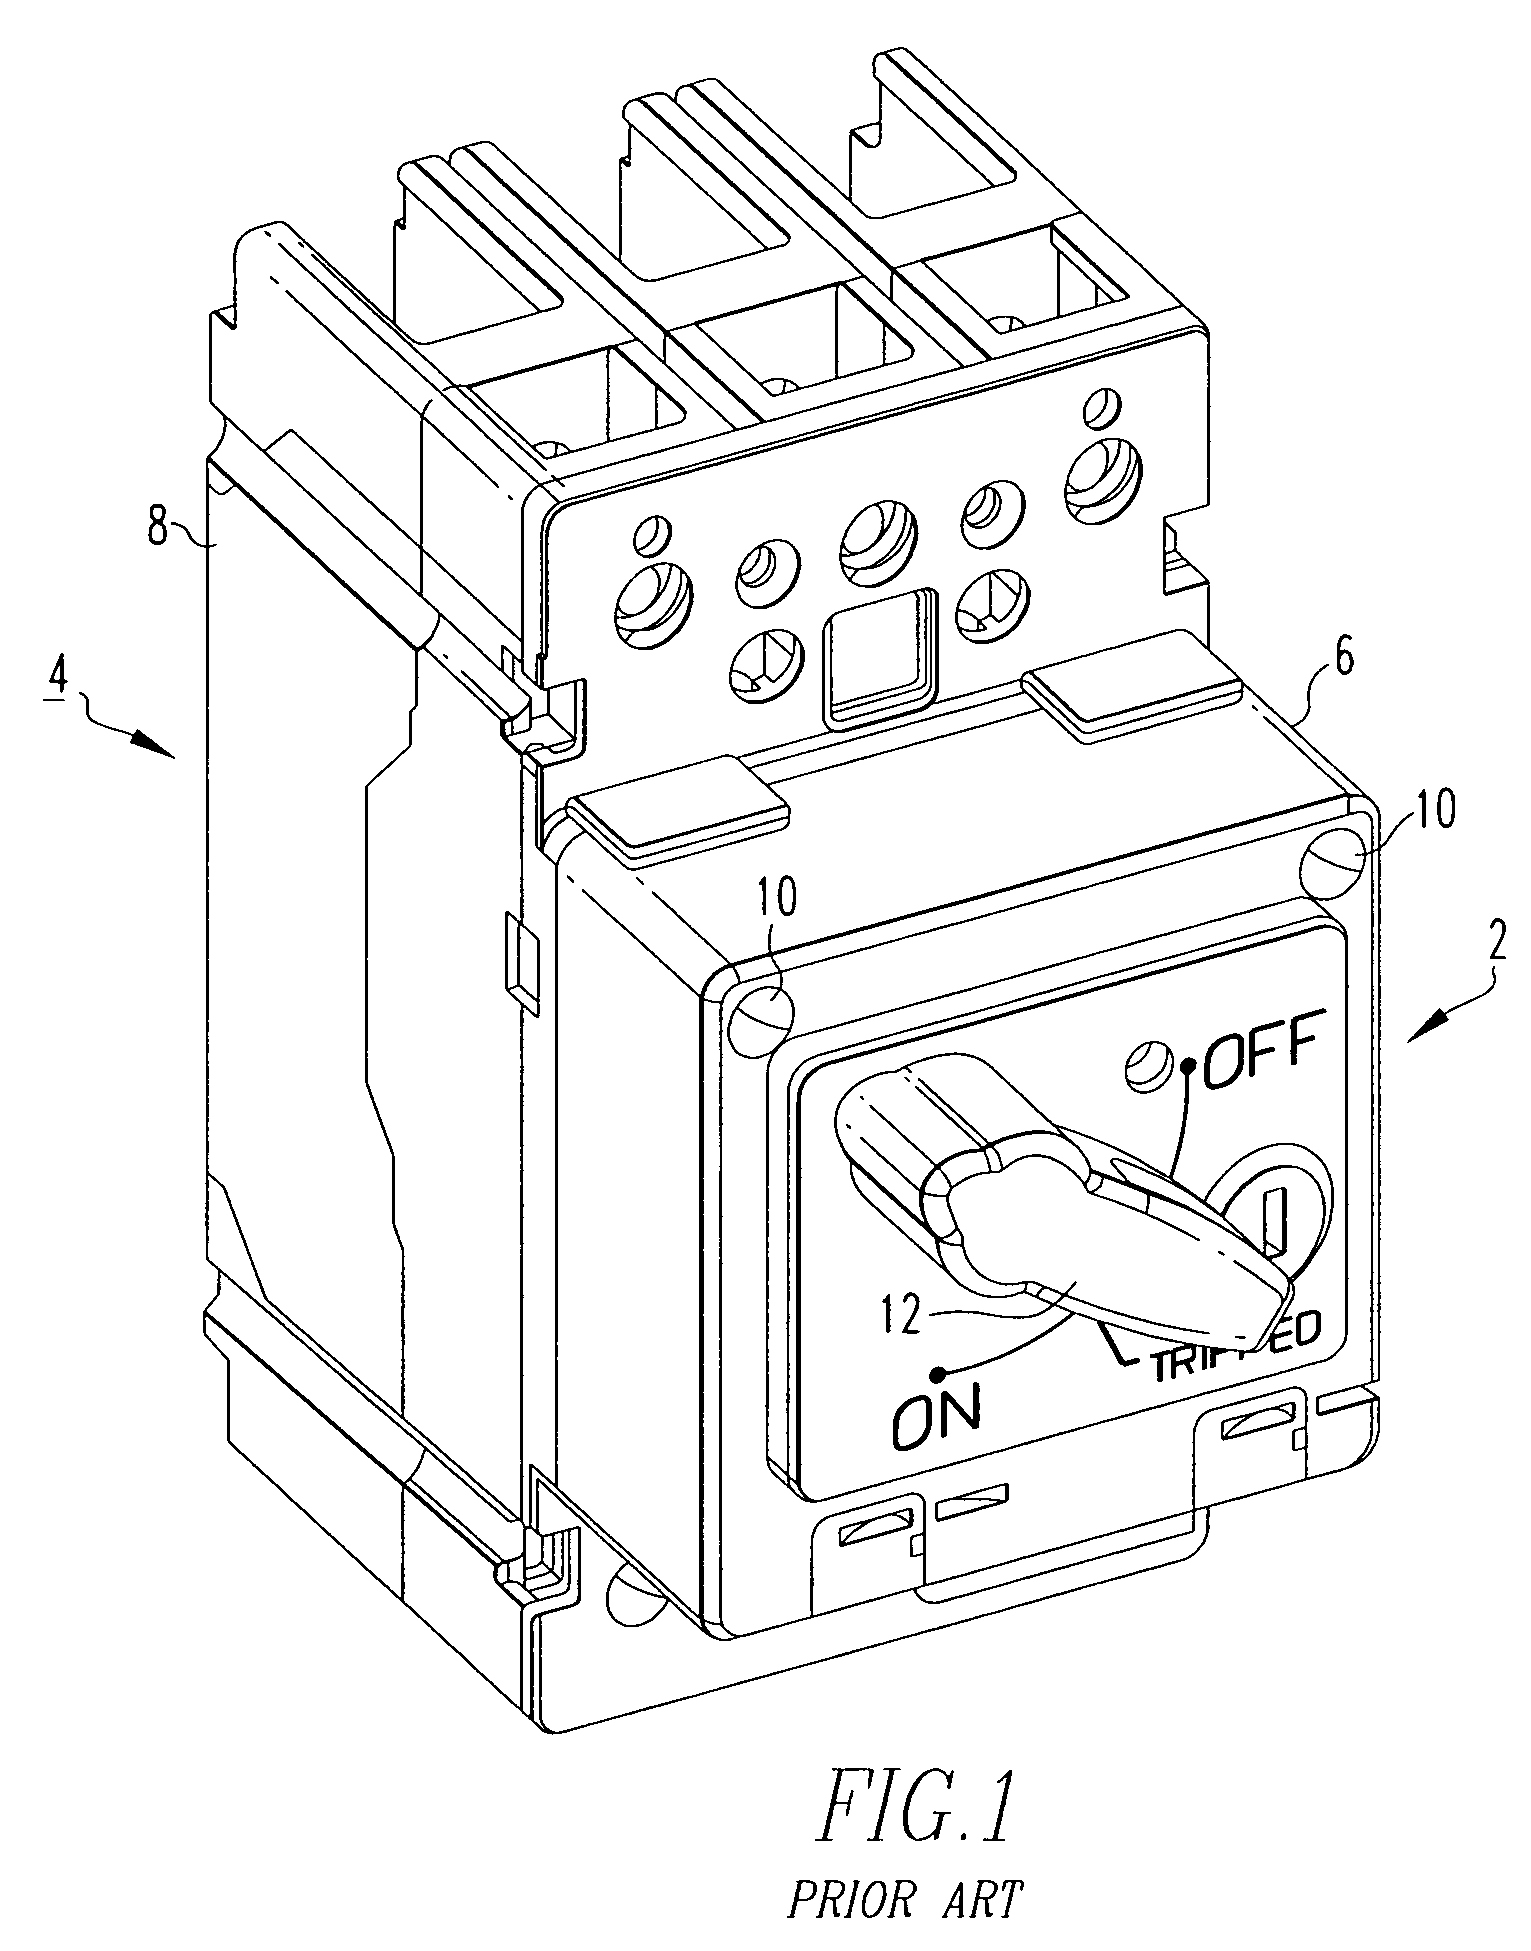 Handle attachment, assist mechanism therefor, and electrical switching apparatus employing the same